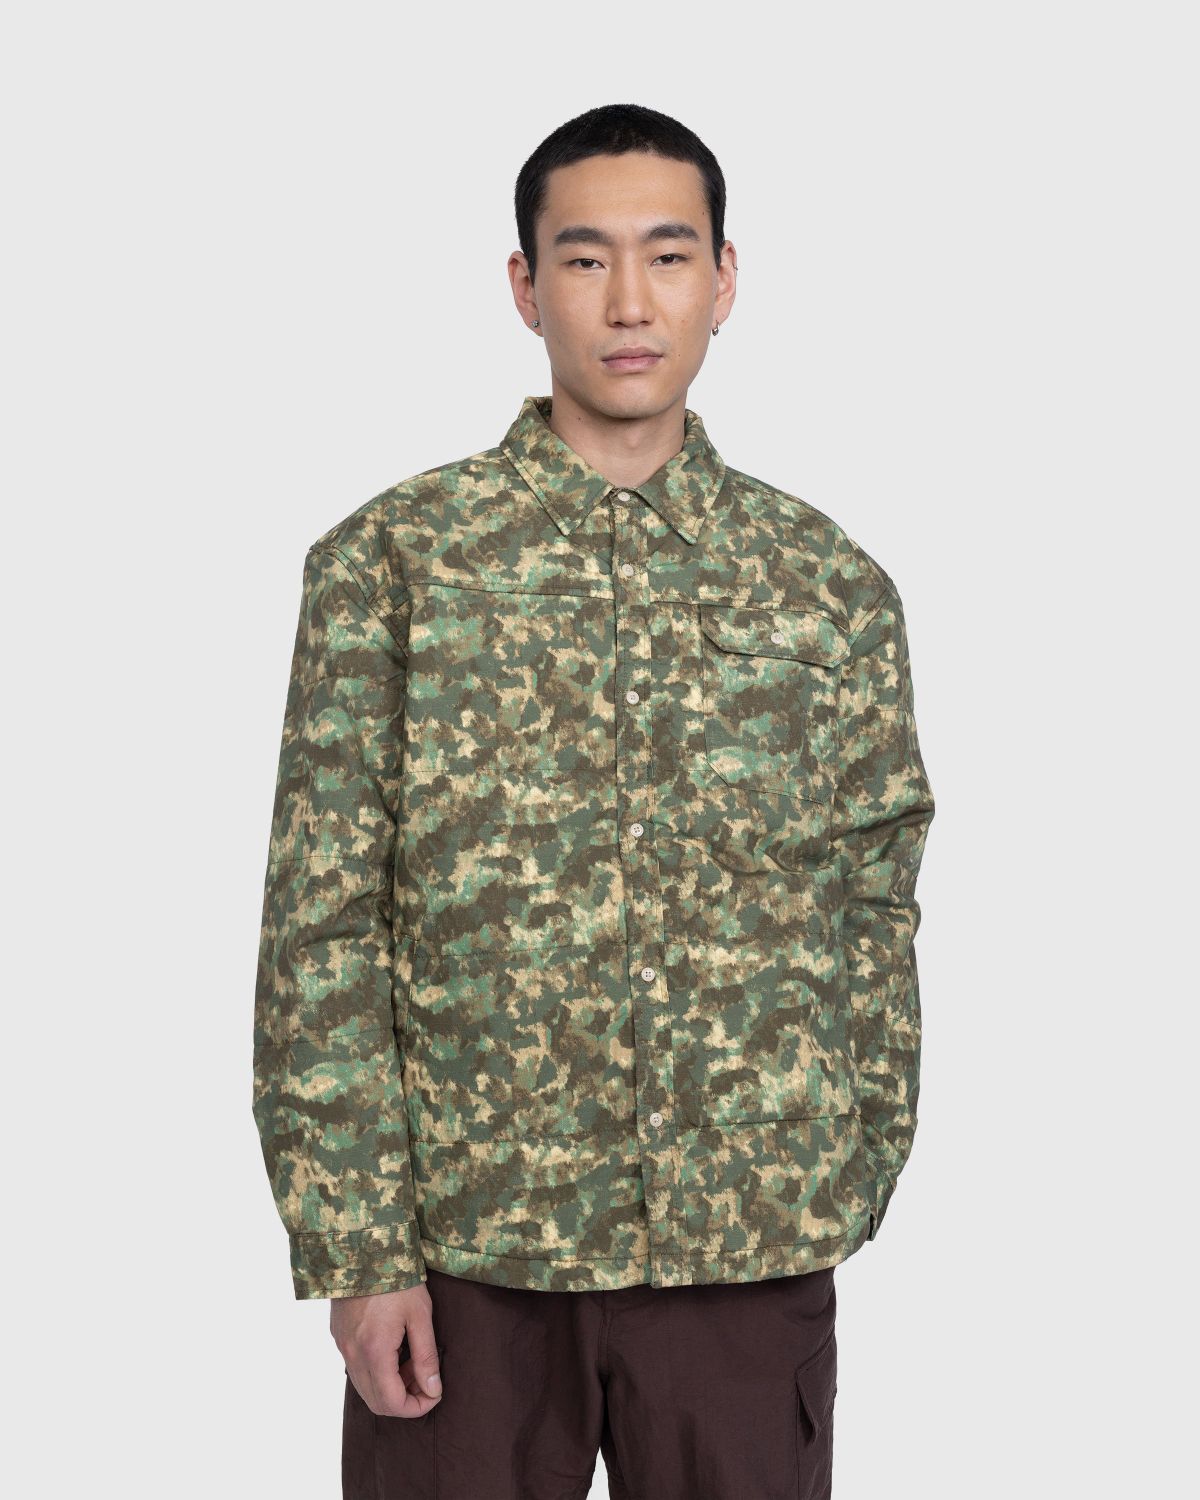 The North Face – M66 Utility Rain Jacket Military Olive/Stippled Camo Print - Outerwear - Green - Image 2